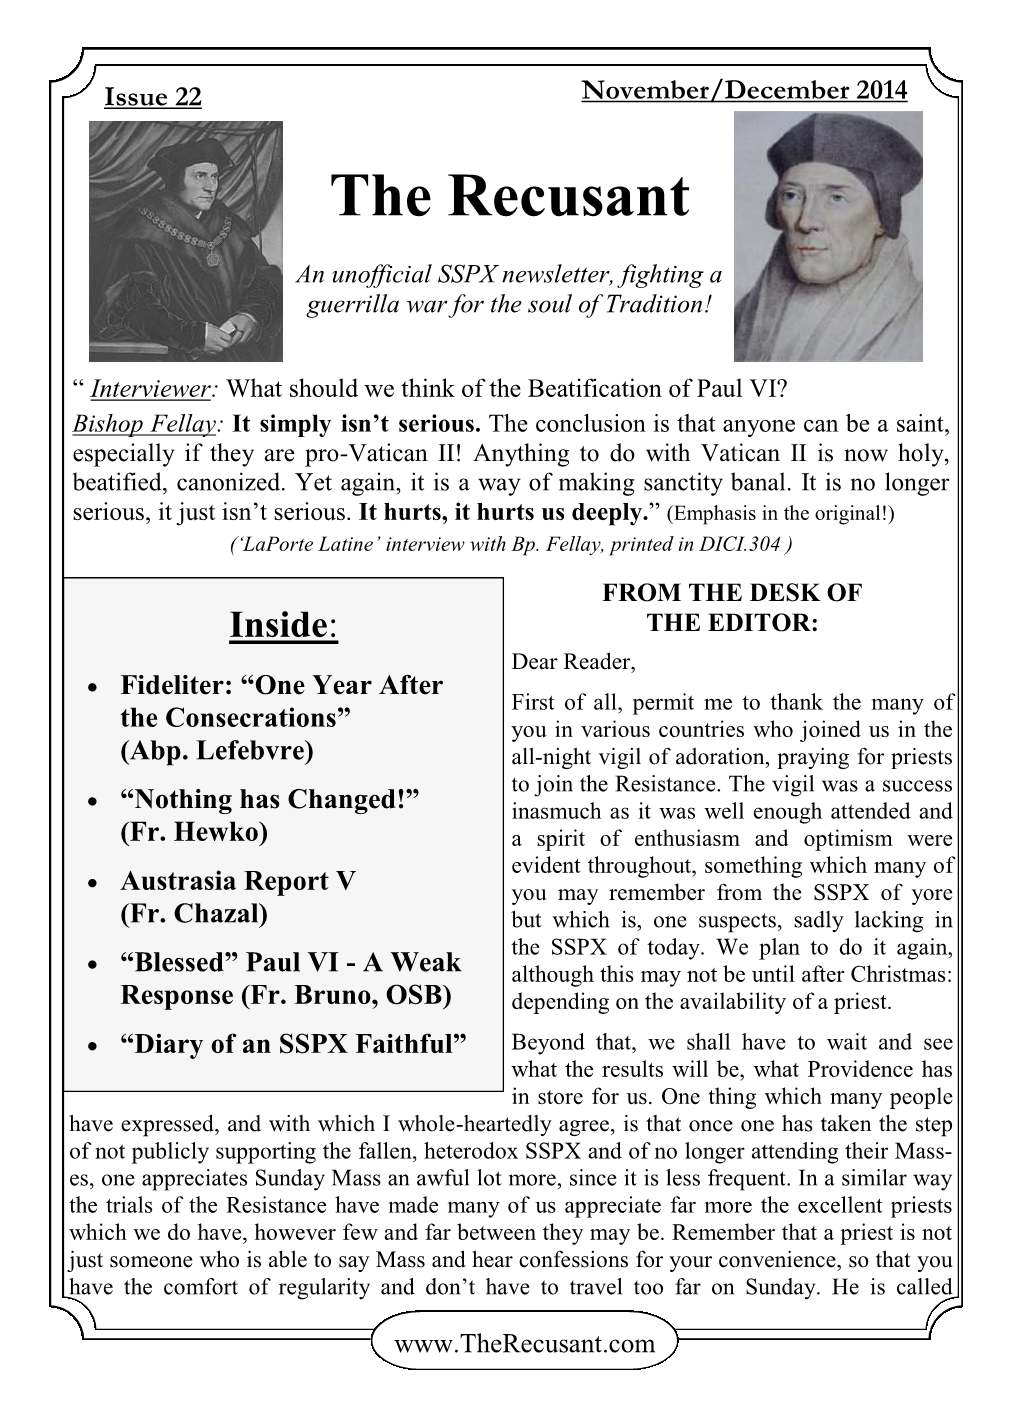 Issue 22 November/December 2014 the Recusant